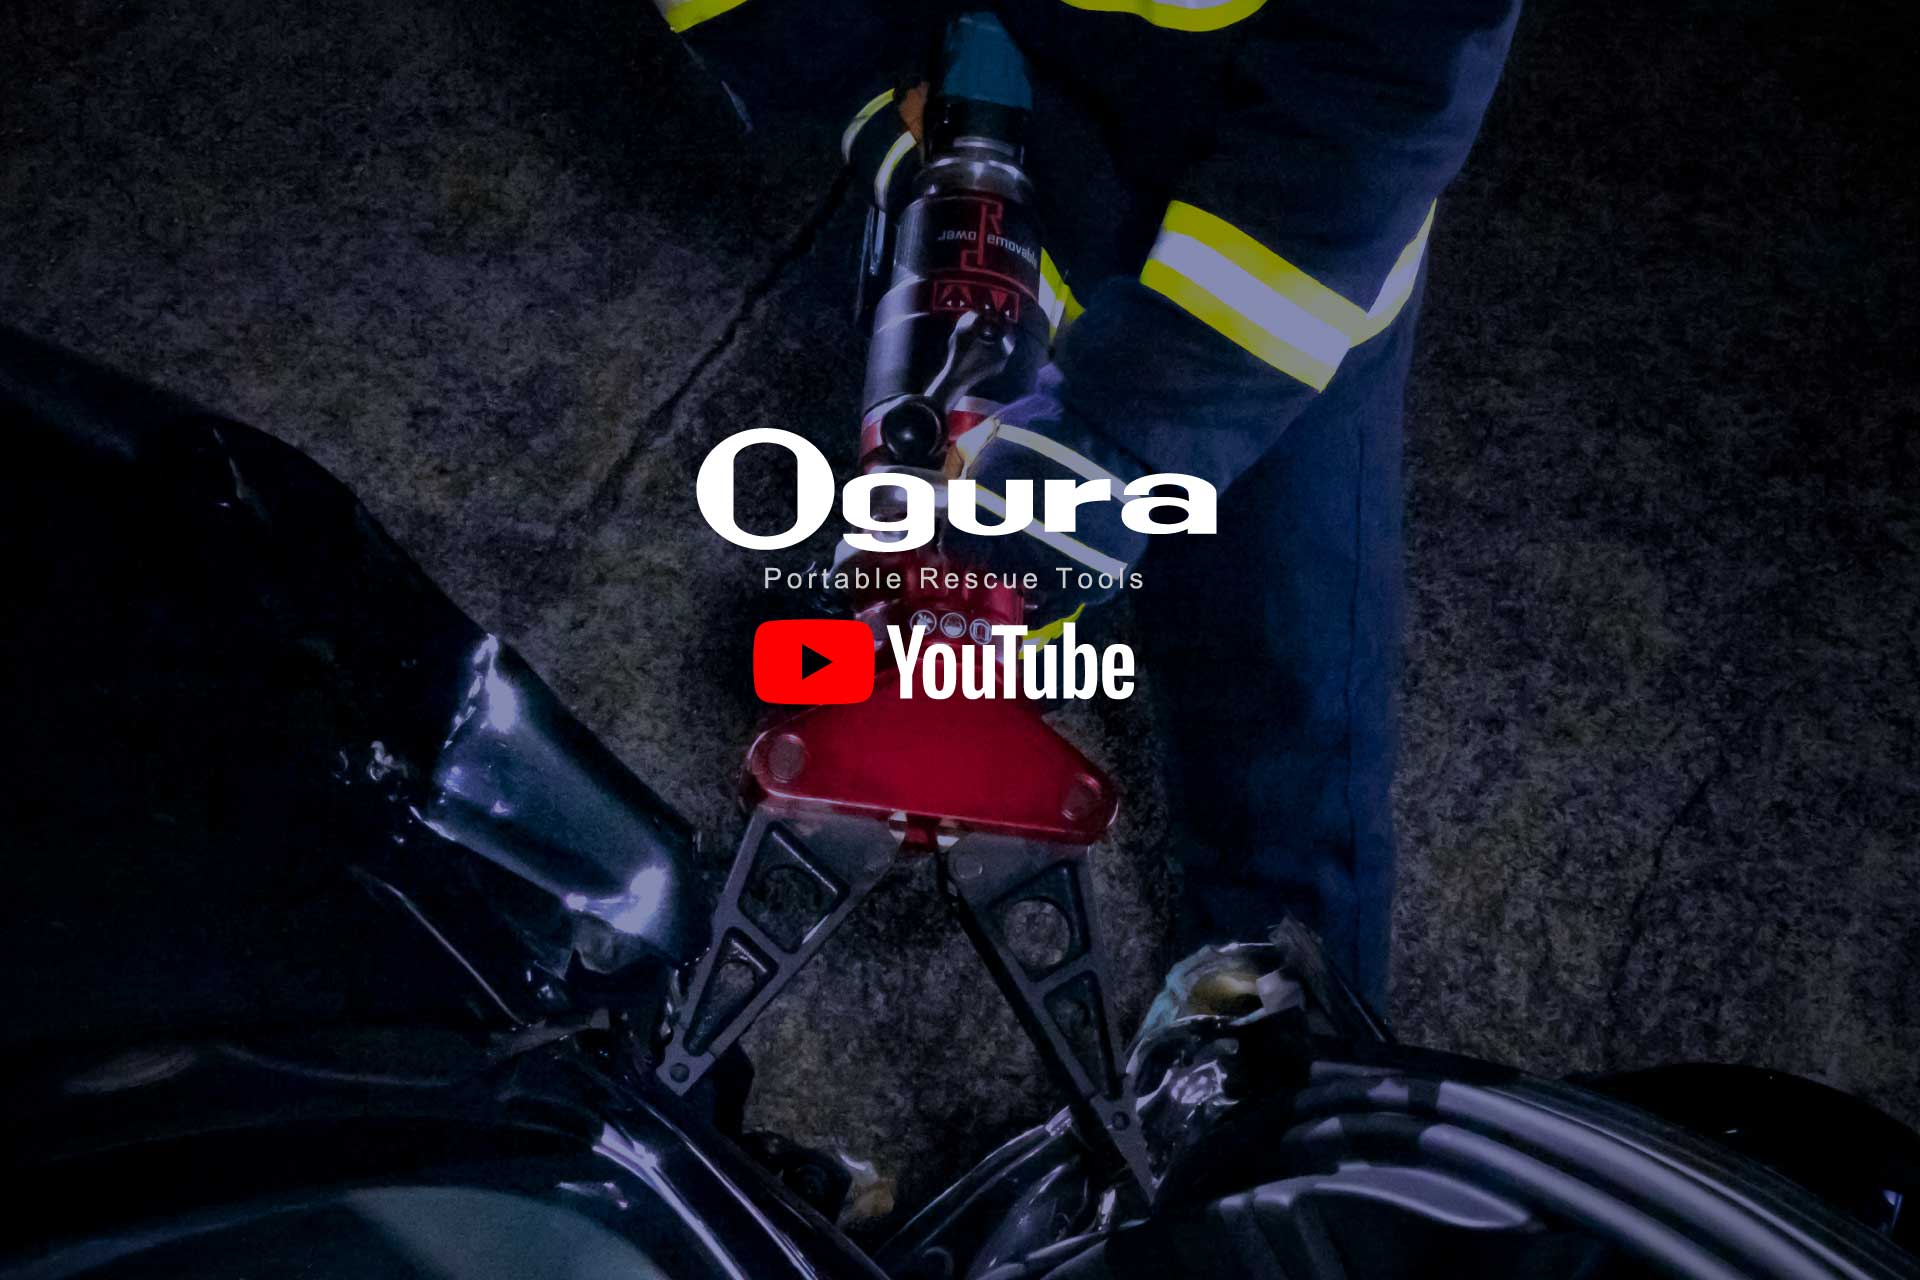 Launched the Ogura Rescue Tools YouTube Channel